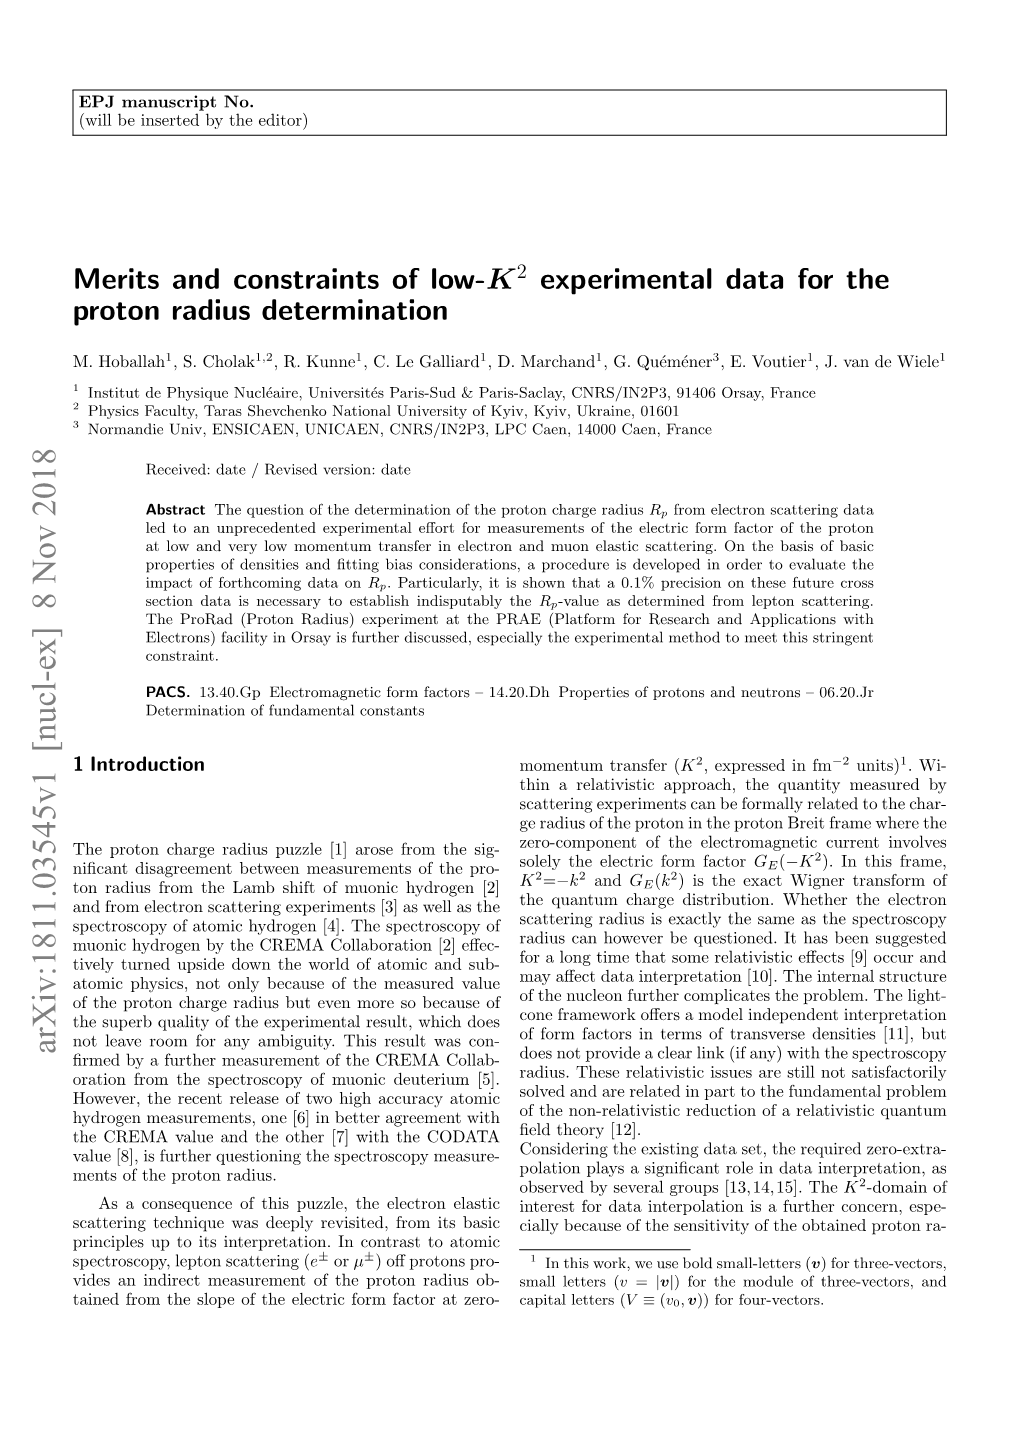 Merits and Constraints of Low-${\Bm K^ 2} $ Experimental Data for the Proton Radius Determination